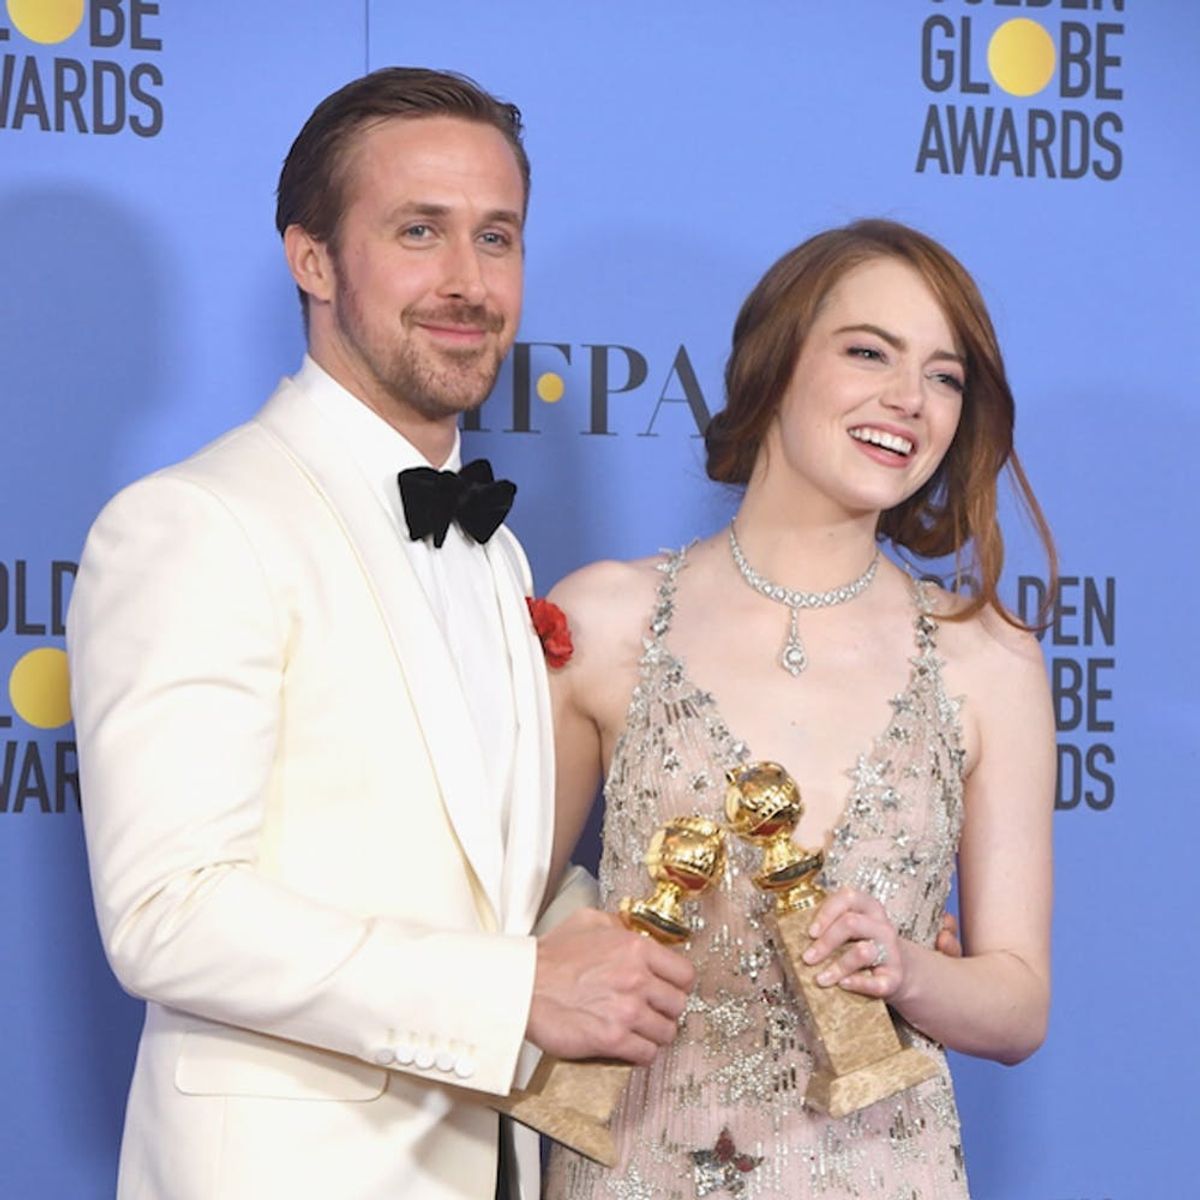 This Underdog Movie Might Give La La Land Some Major Oscars Competition